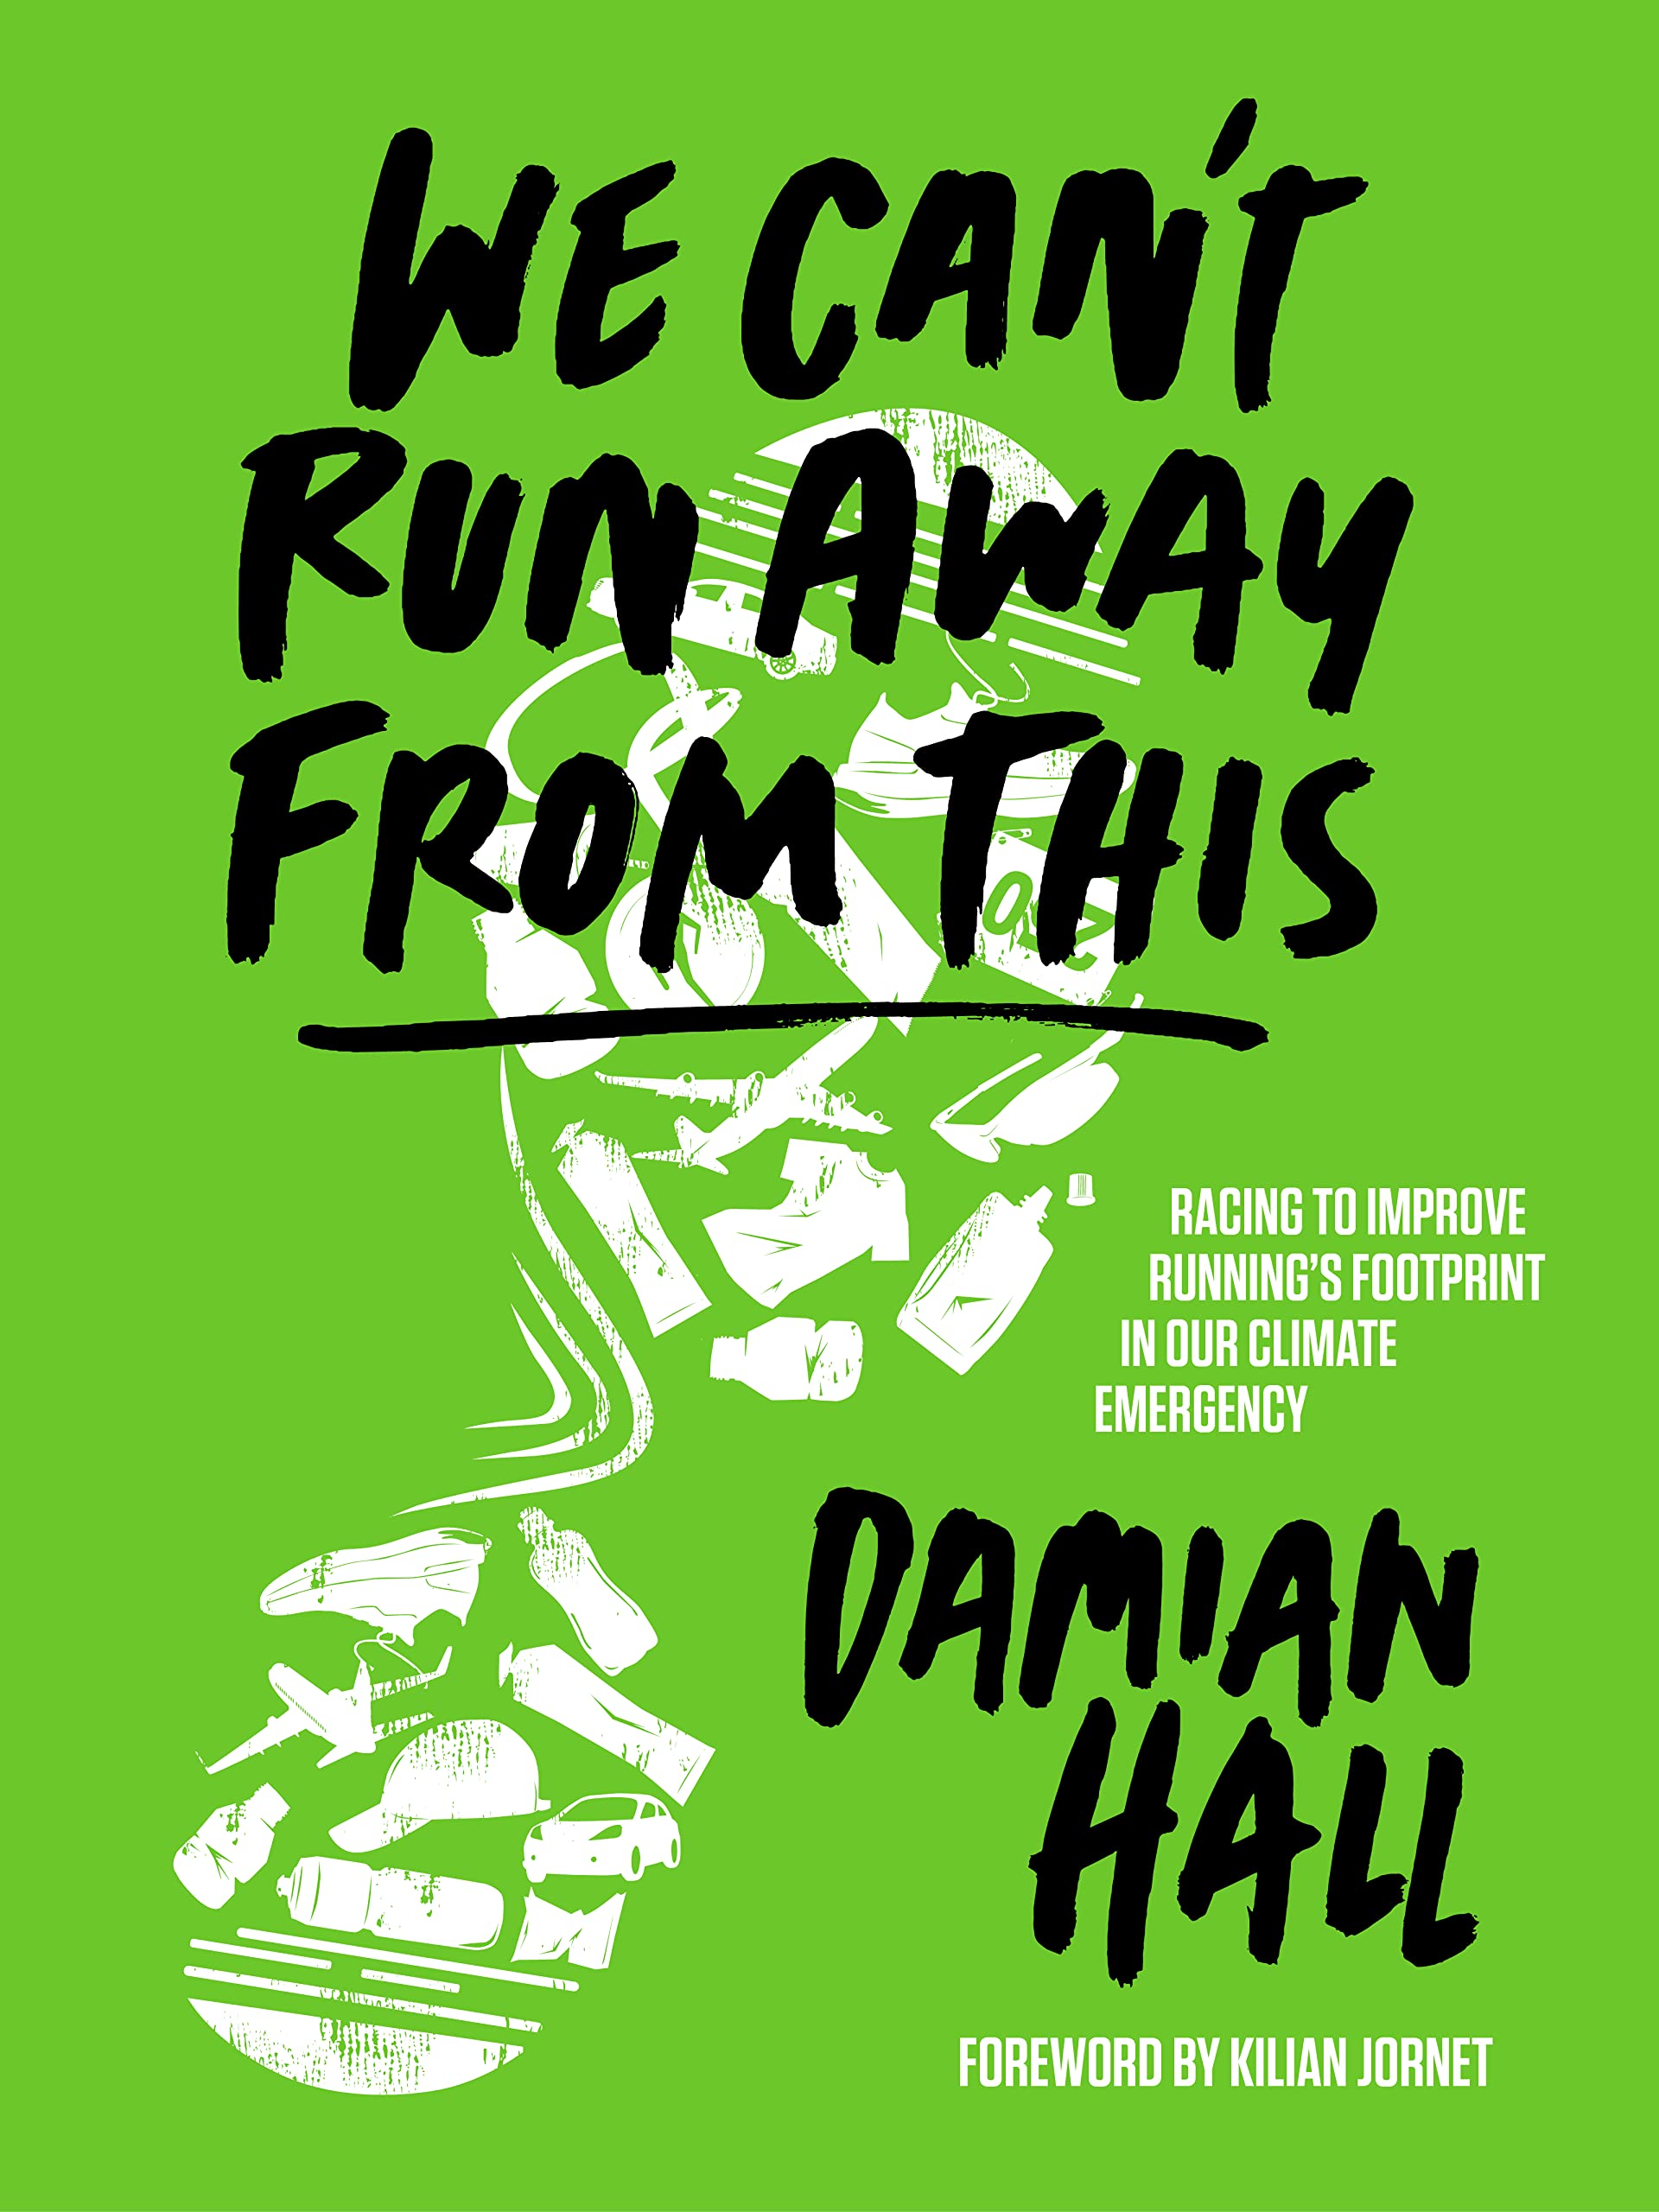 Front cover of the book We Can't Run Away From This by Damian Hall